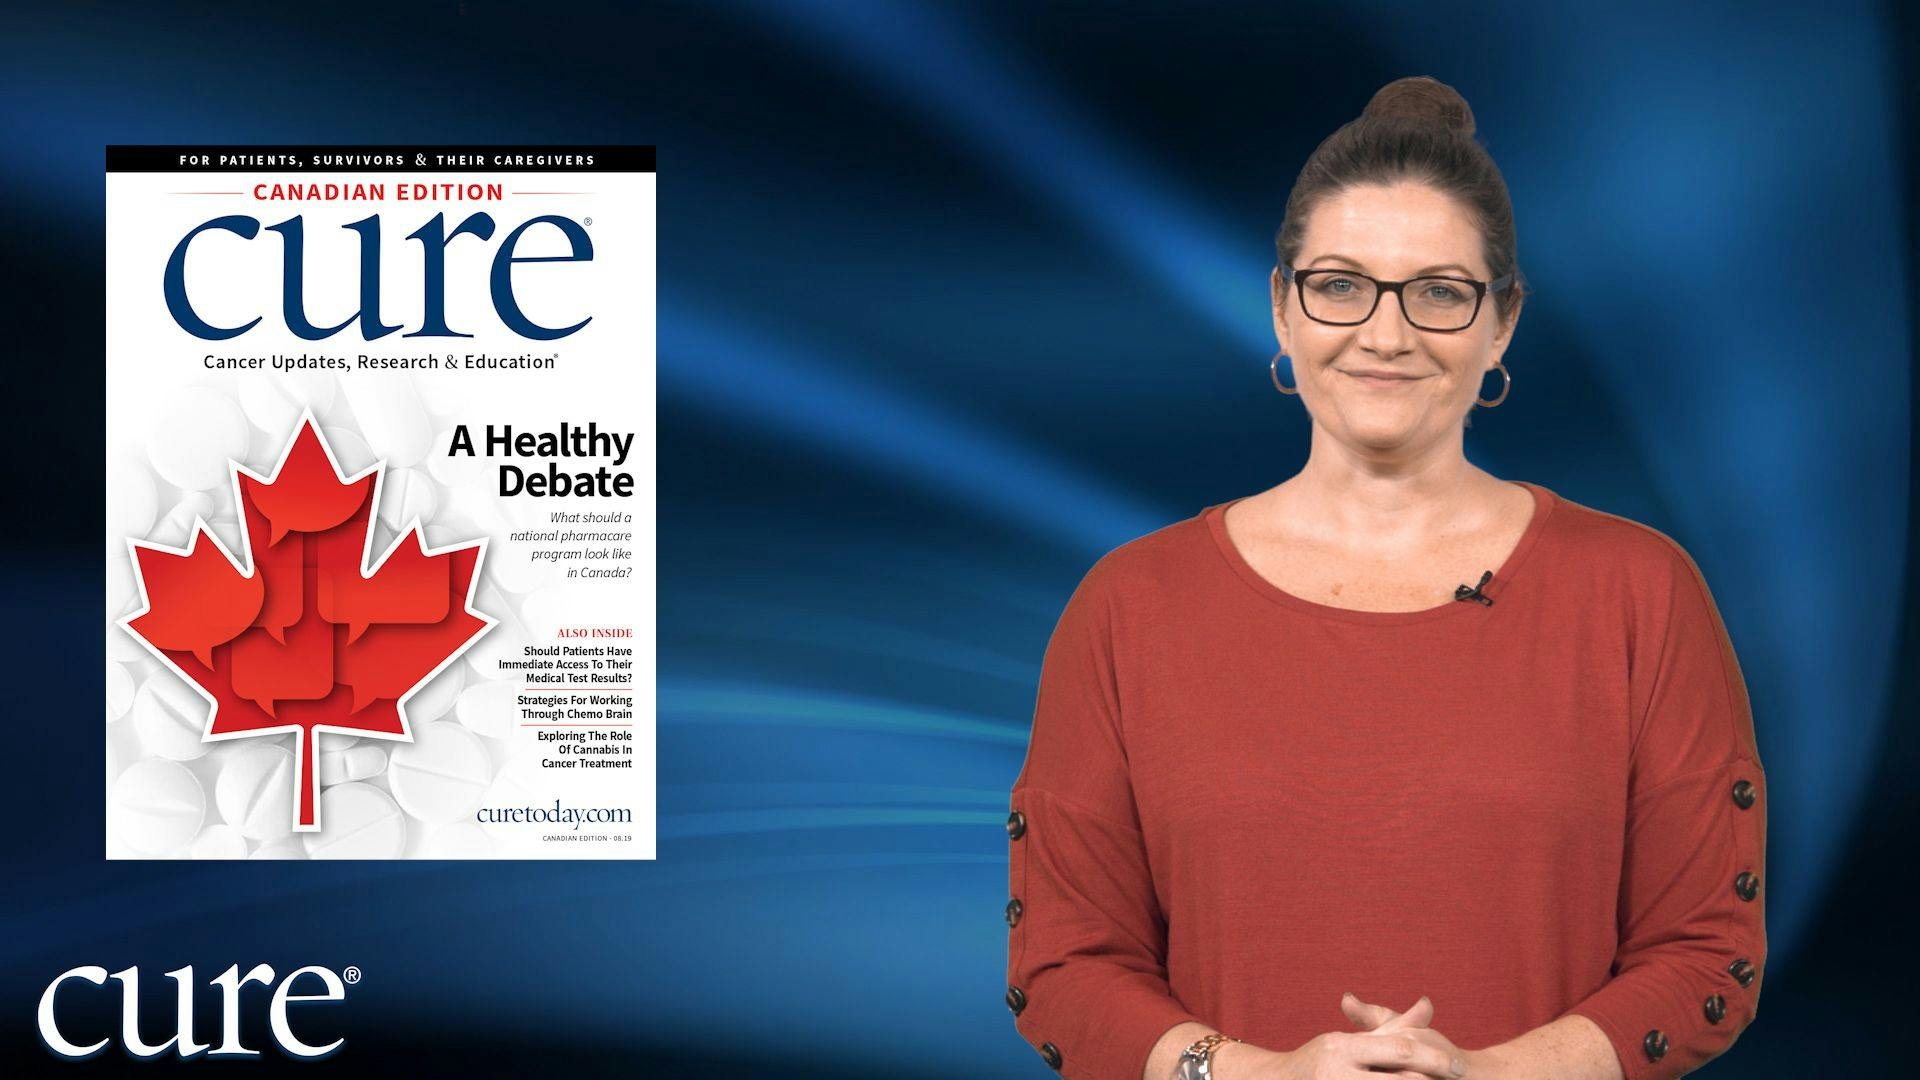 CURE New Issue Alert: Canadian Edition